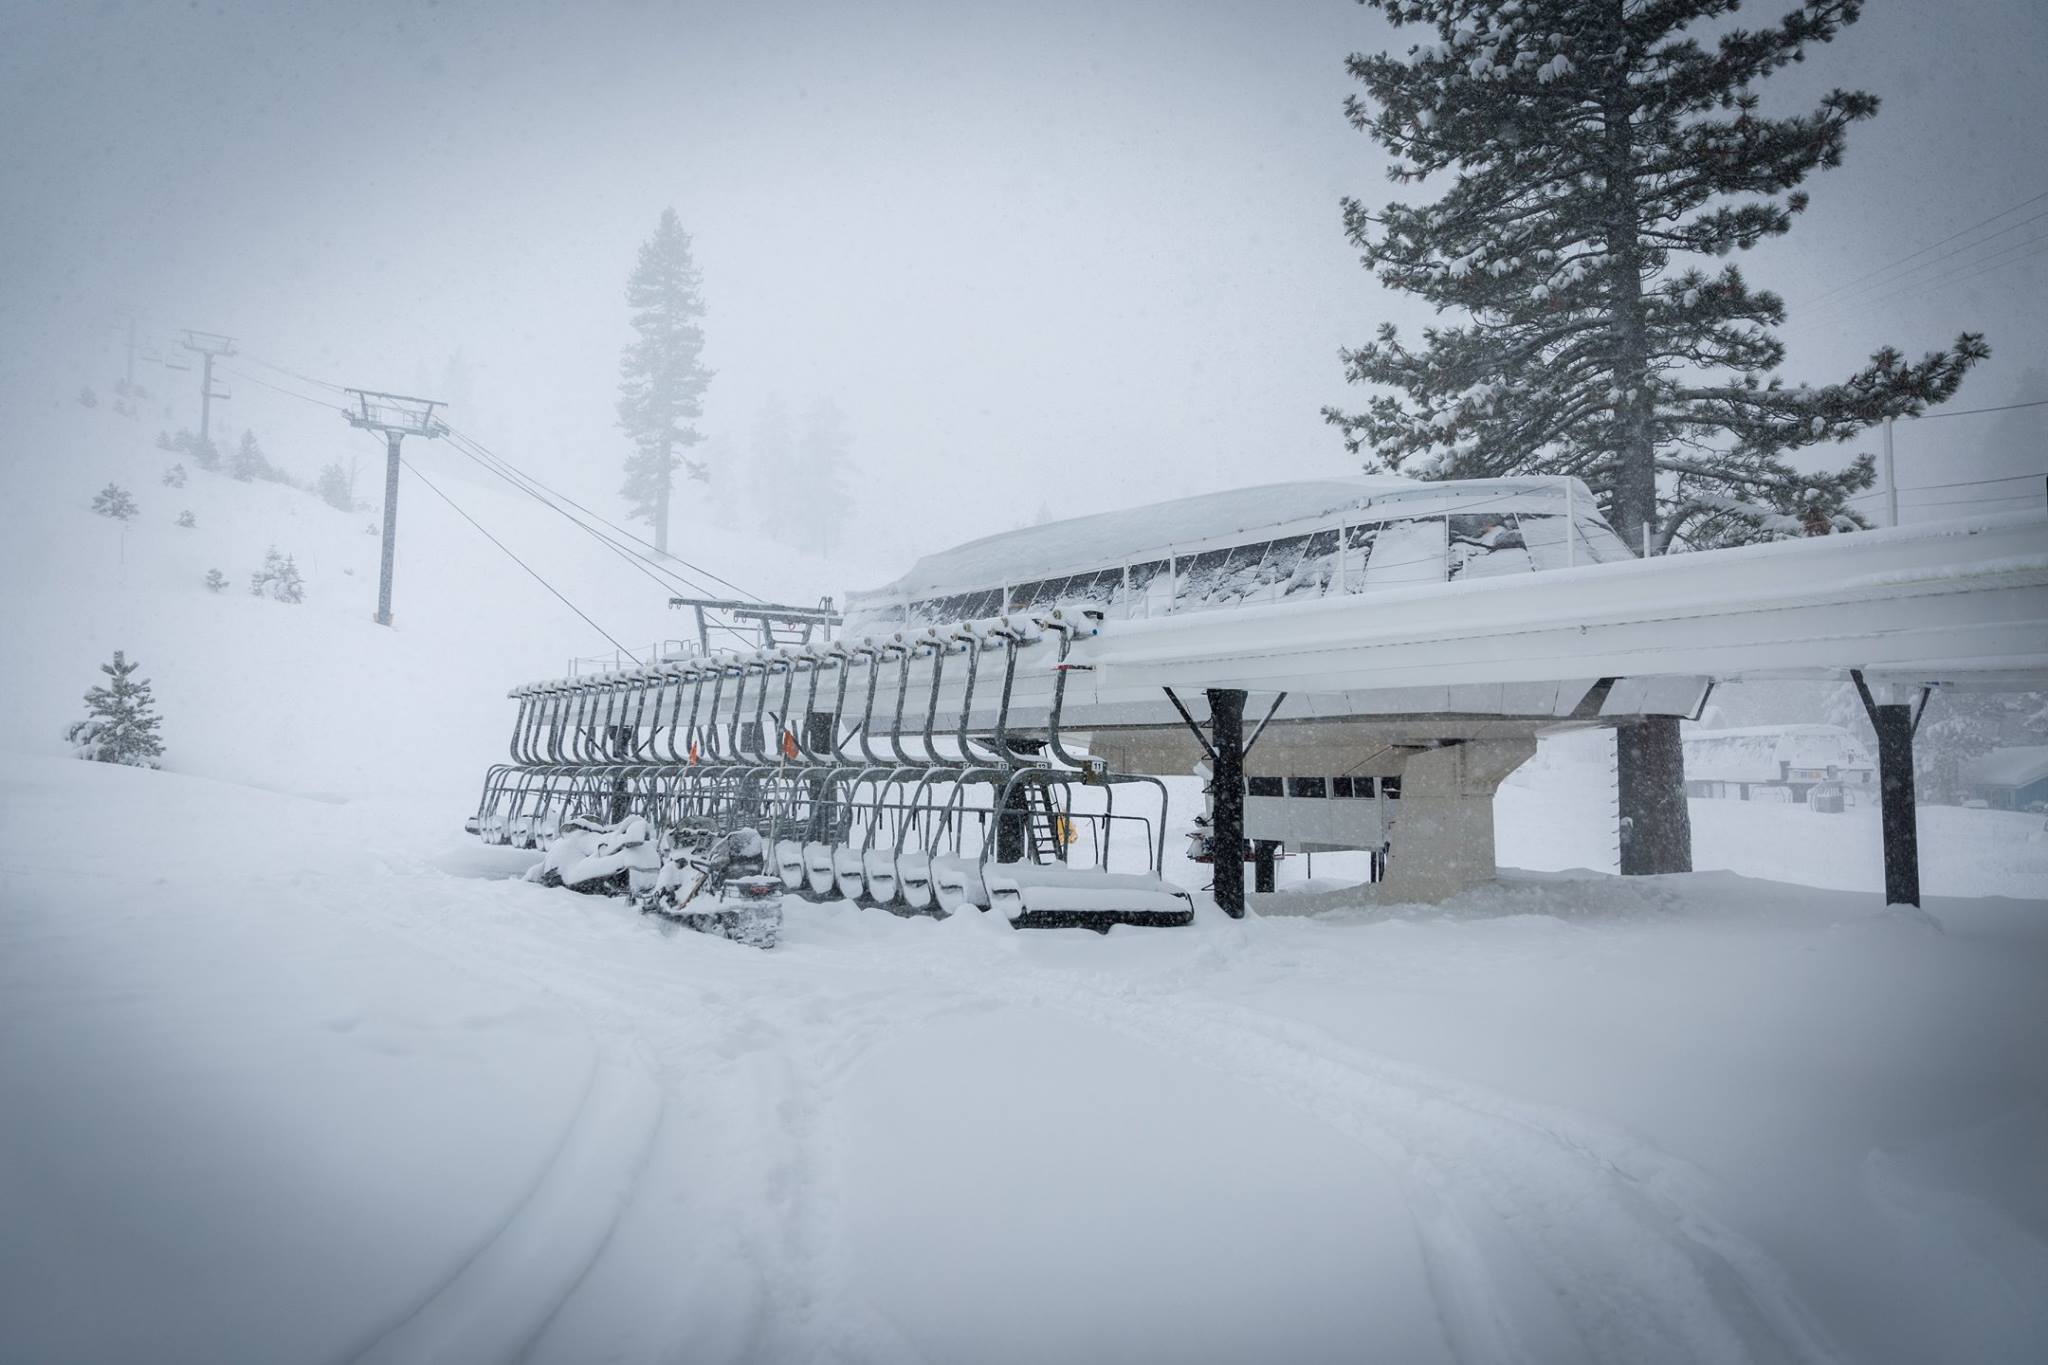 Squaw Valley Has The Goods. Image: Squaw Valley Facebook Page